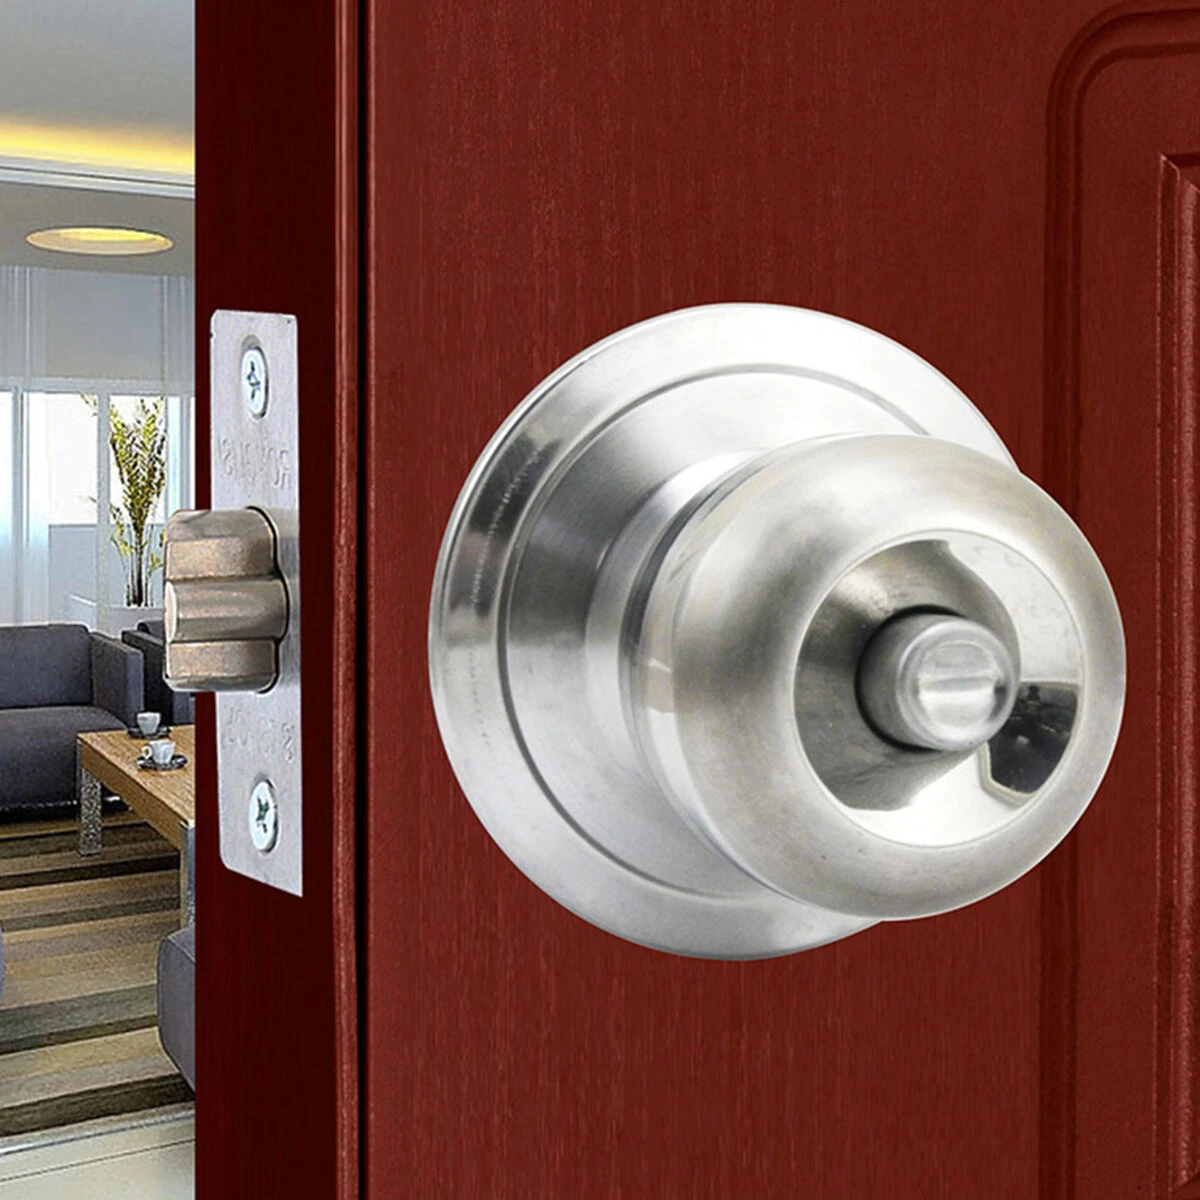 Stainless steel round door knobs privacy passage entrance lock entry with 3 keys